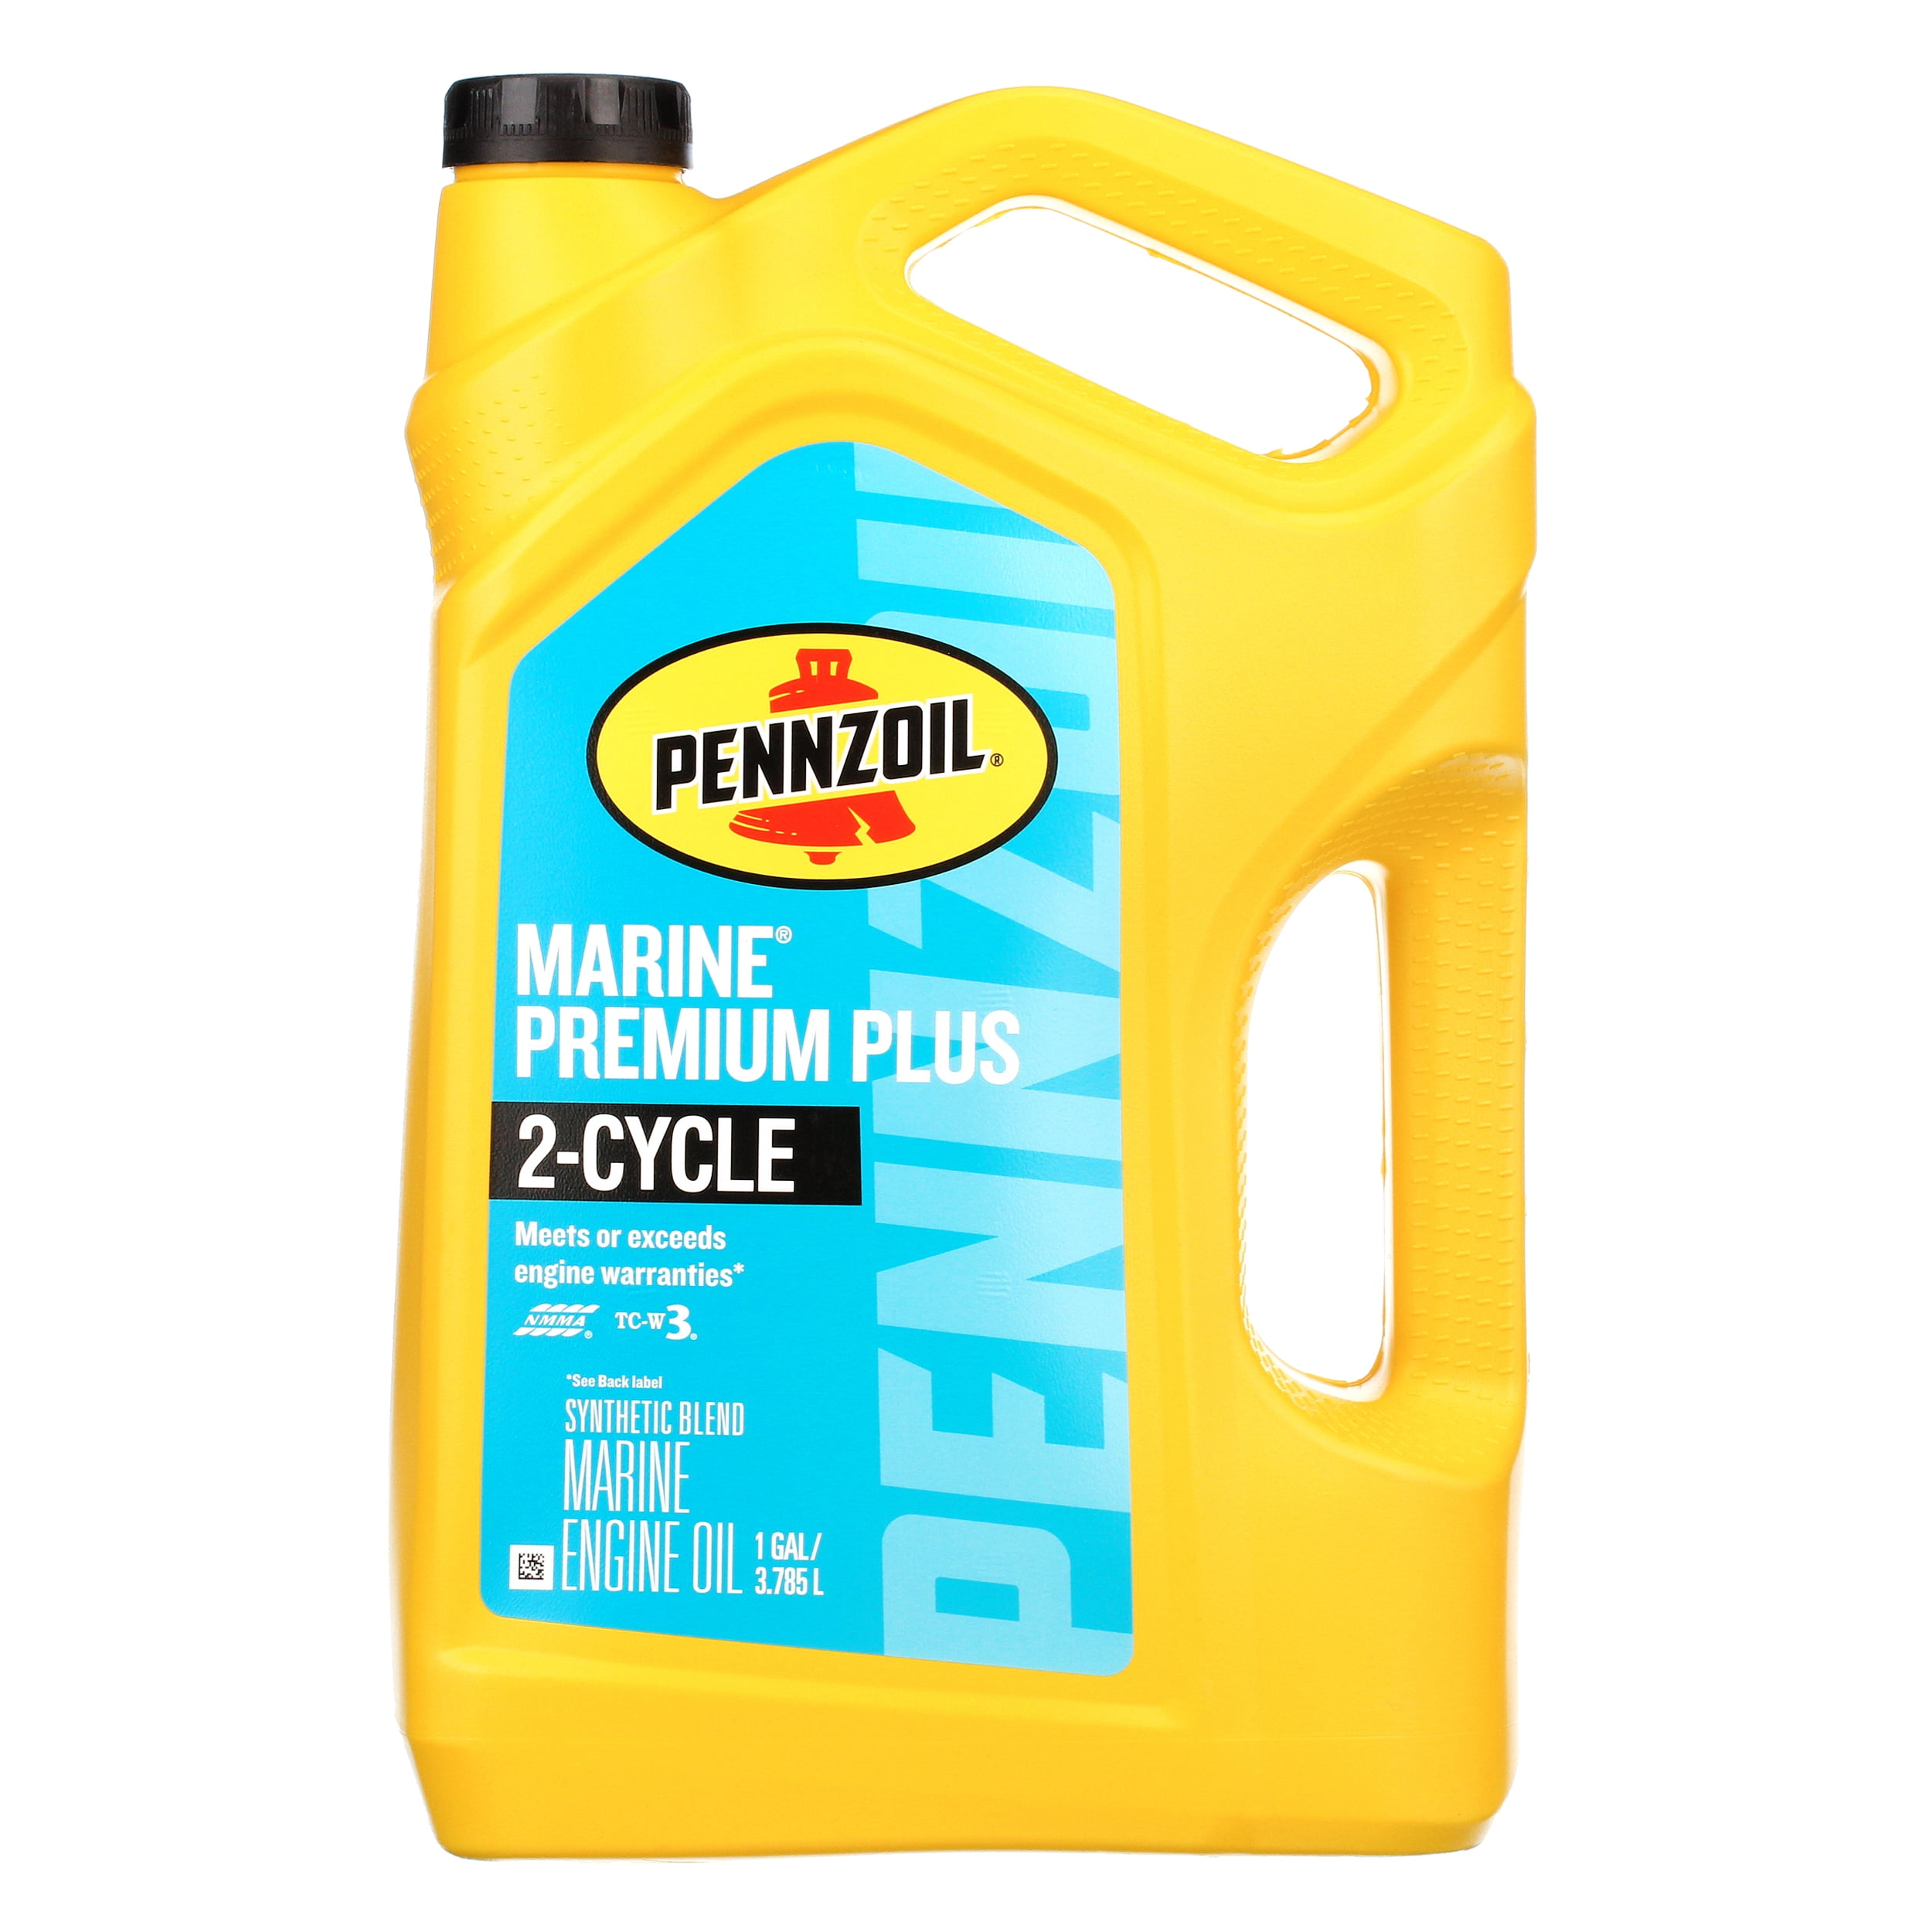 pennzoil-marine-premium-plus-2-cycle-synthetic-blend-motor-oil-1